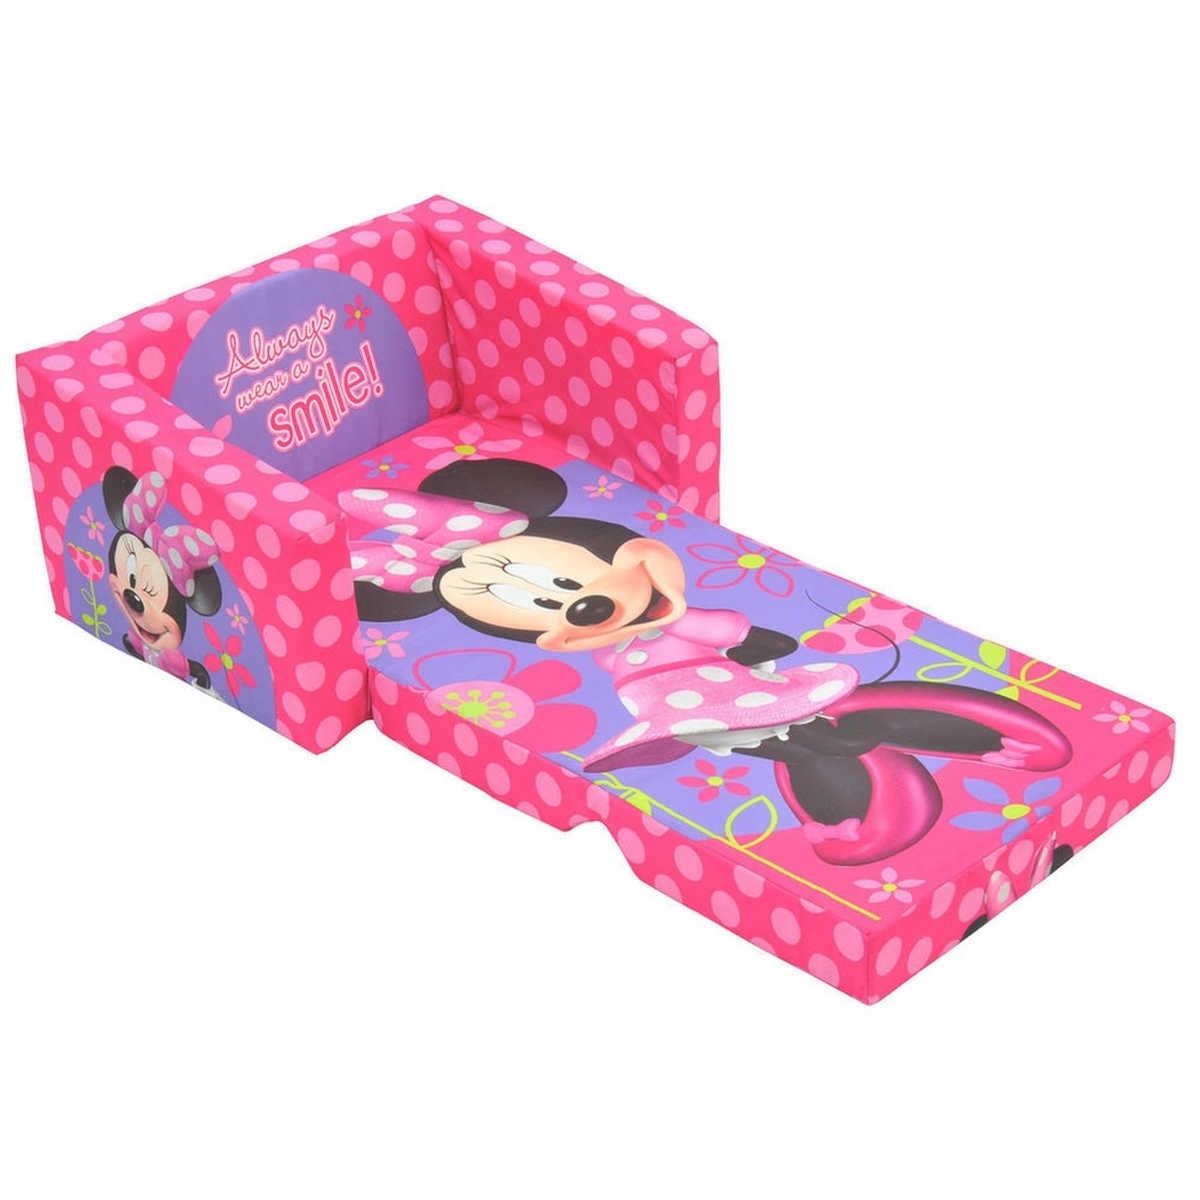 Minnie Mouse Flip Out Sofa Bed • Sofa Bed In Flip Out Sofas (View 5 of 10)